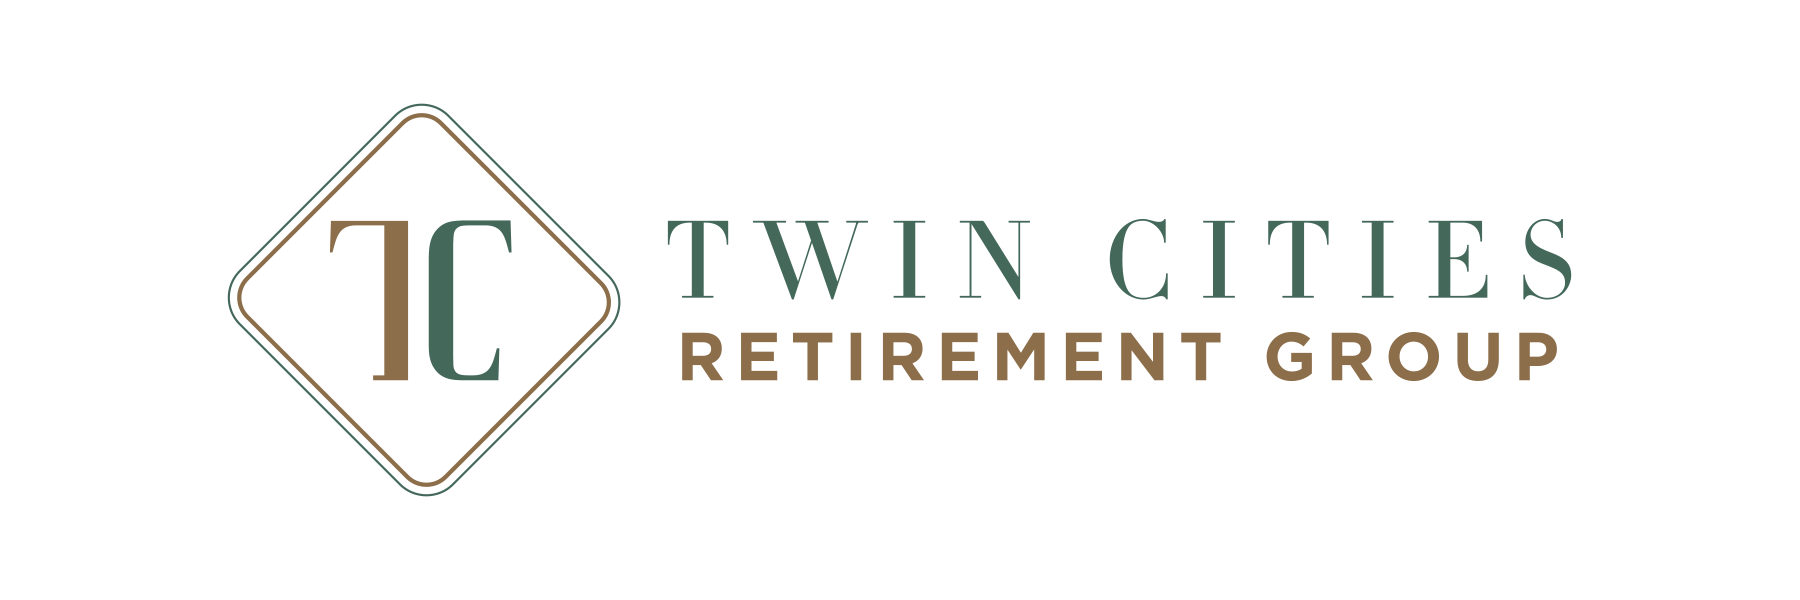 Twin Cities Retirement Group Logo